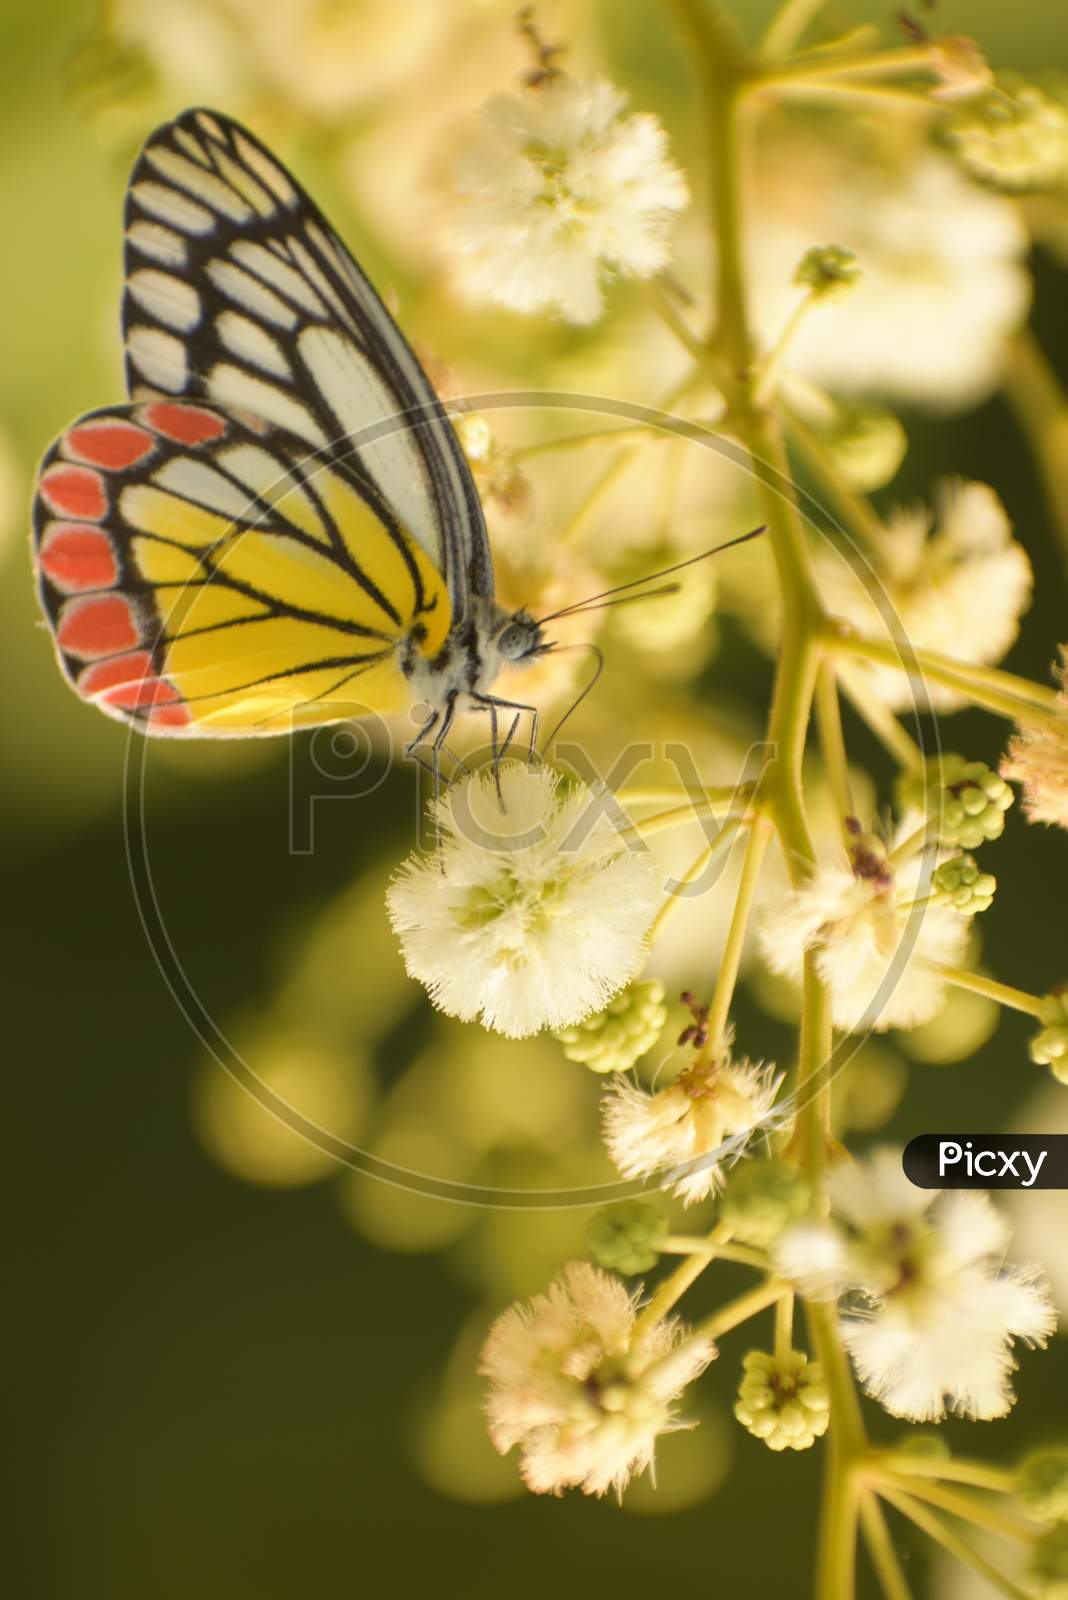 Beauty Of Nature . Picture Of Common Jezabel ( Delias Eucharis ) Butterfly Enjoying Freedom Life.